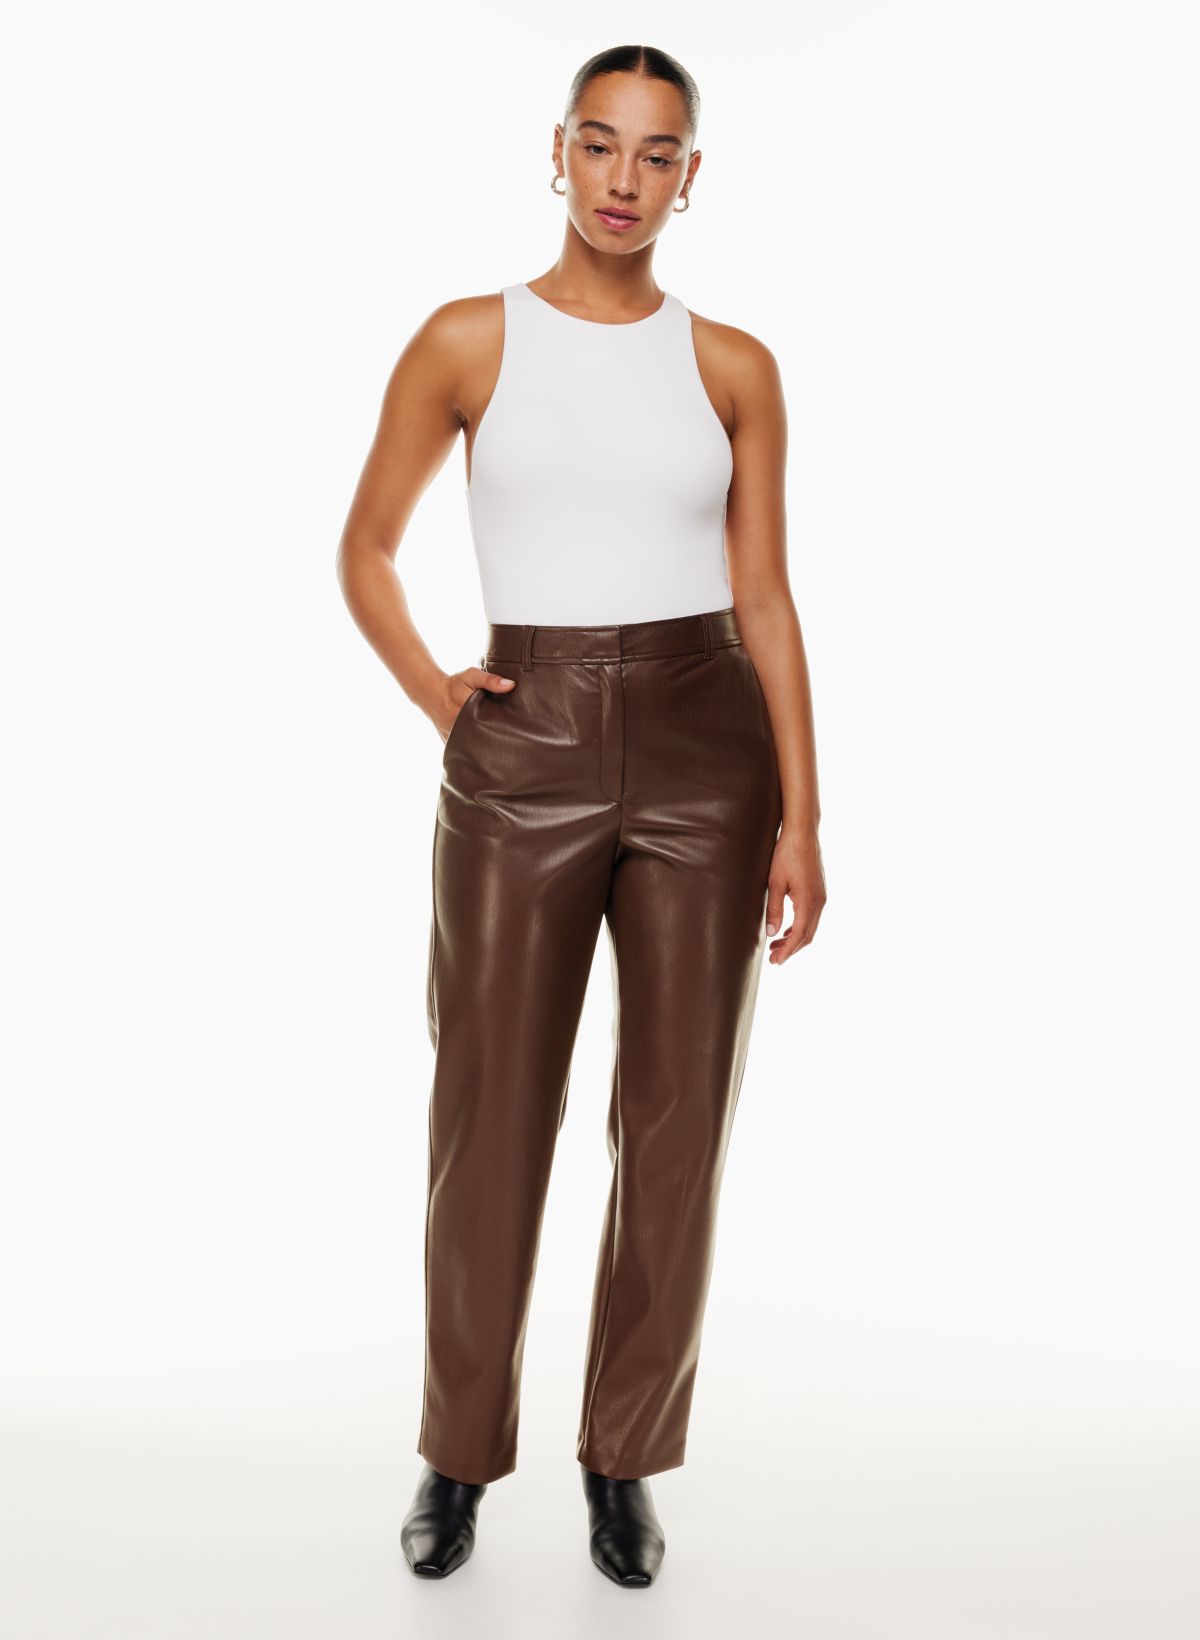 Woman in White Tank Top and Green Leather Pants Fixing Hair · Free